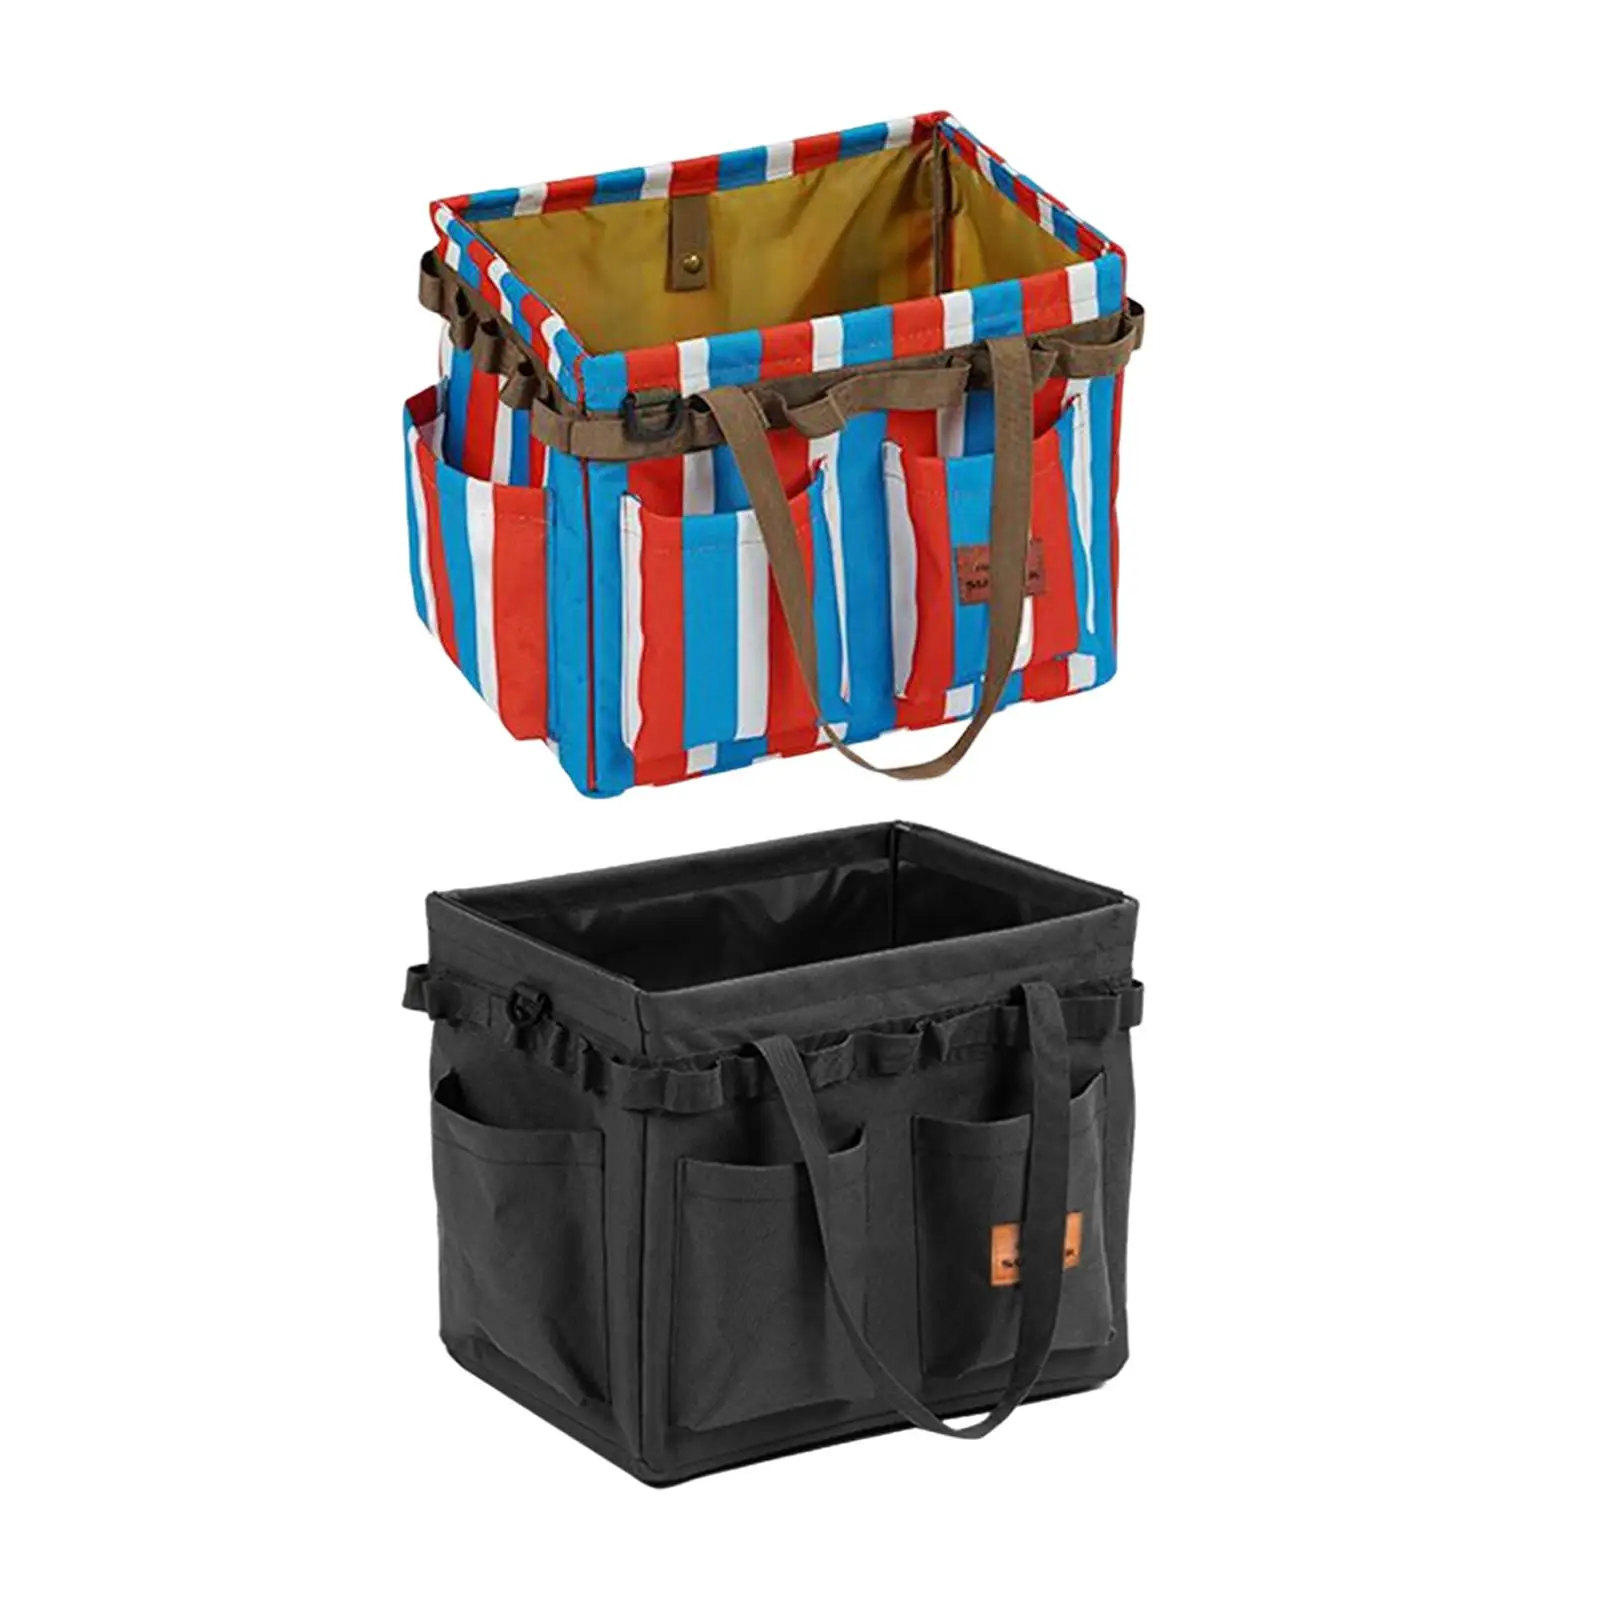 Multifuncational Camping Storage Bag Tool Organizer Pouch with Carry Handles